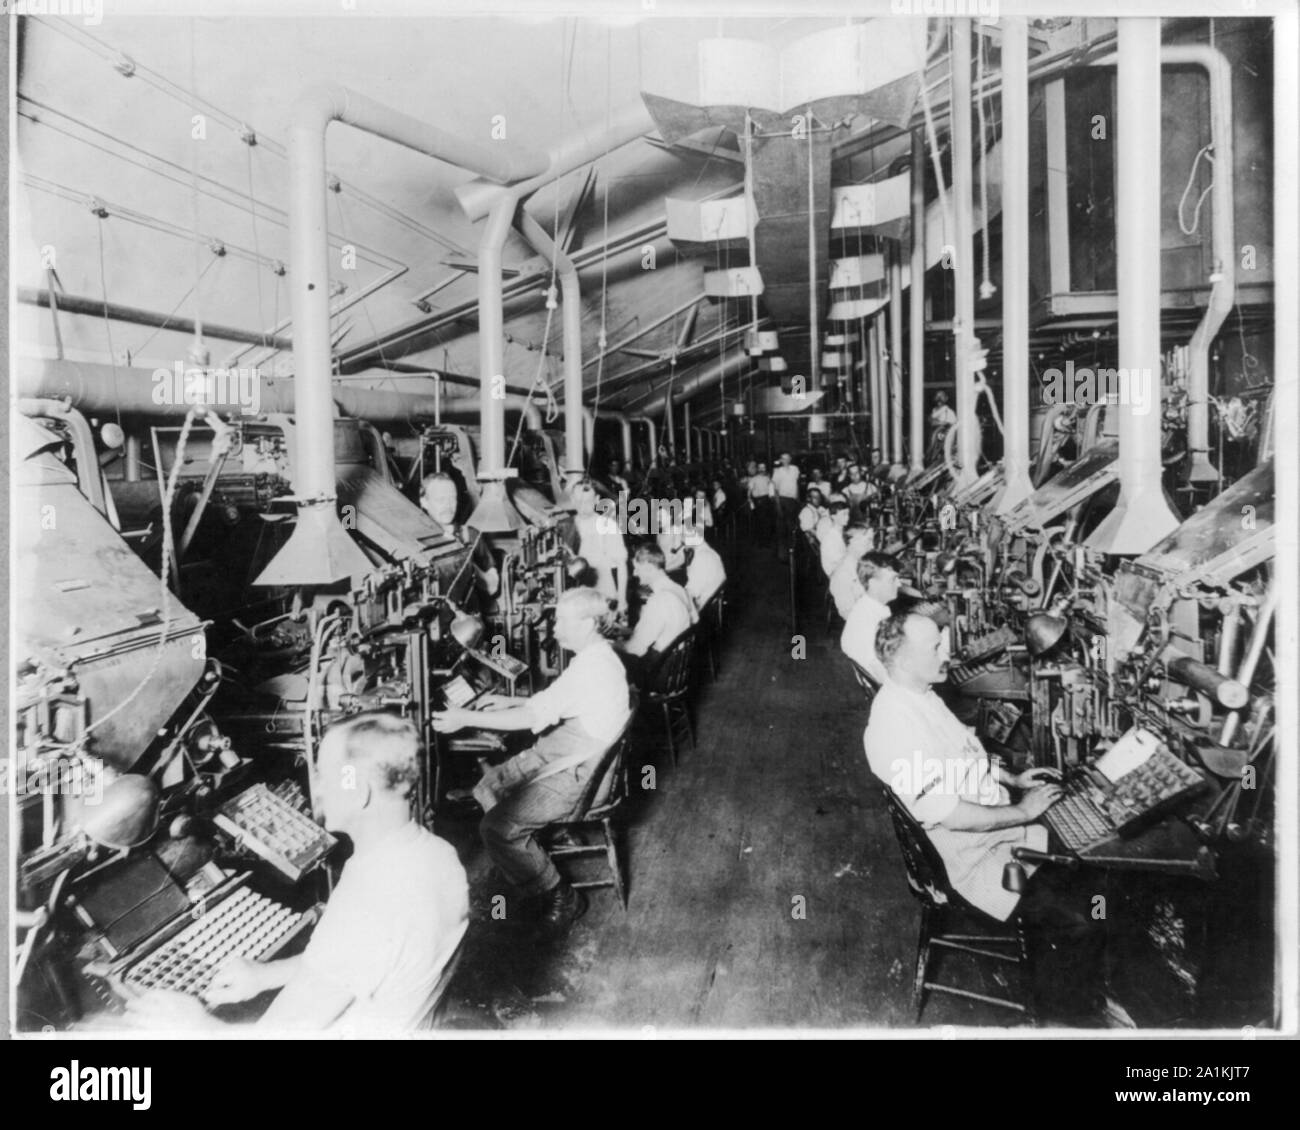 Newspaper publishing - N.Y. Herald: Composing room and linotype machines Stock Photo